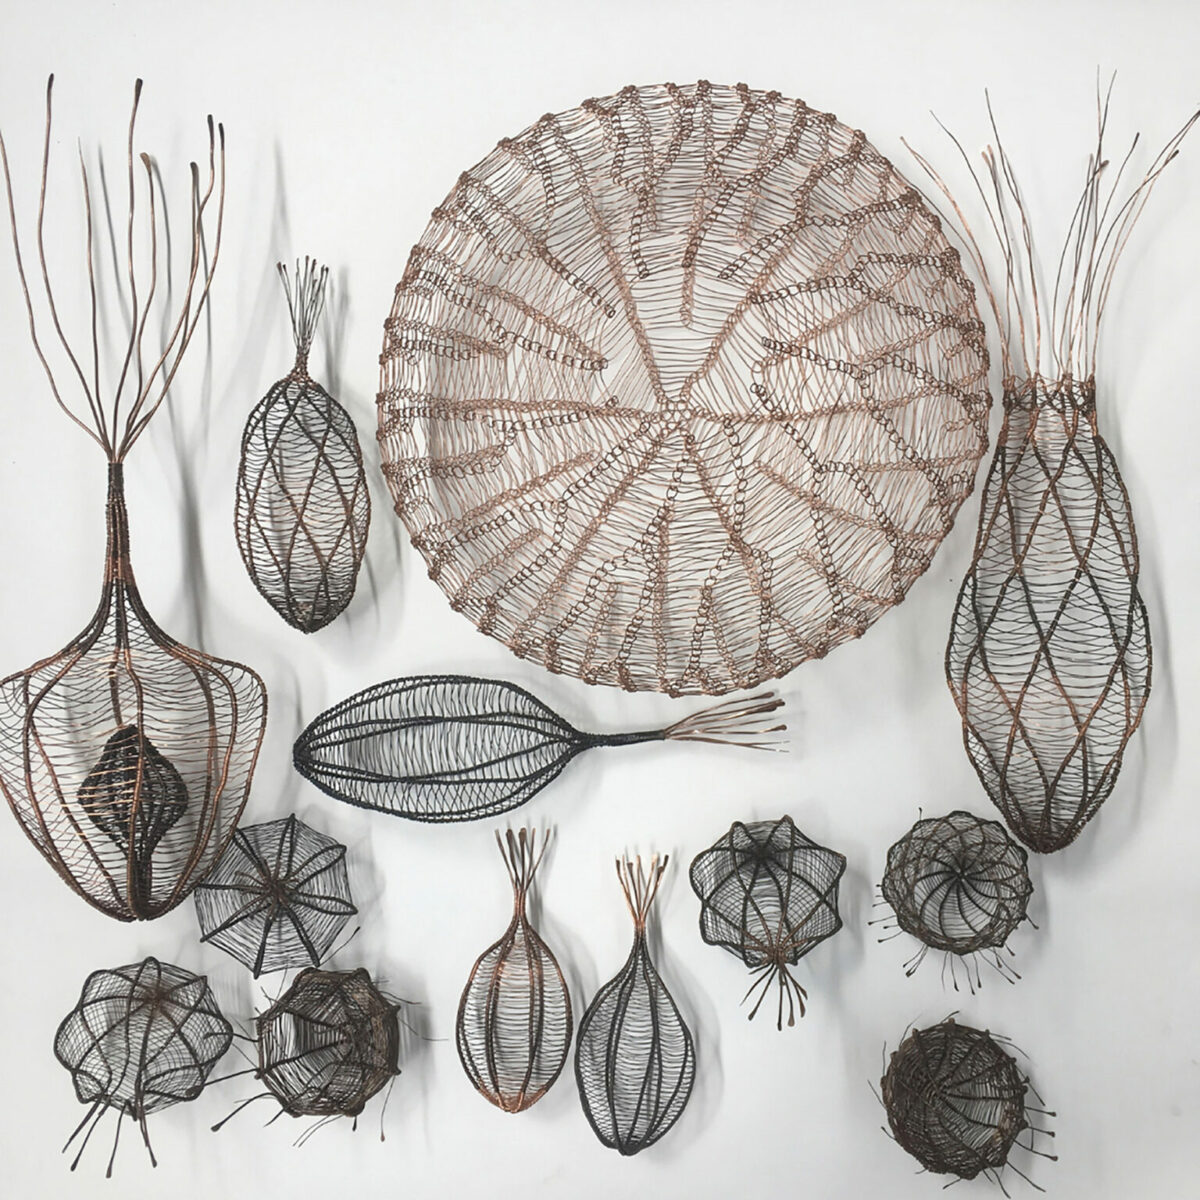 Fascinating Organic Shaped Copper Wire Sculptures By Sally Blake 10